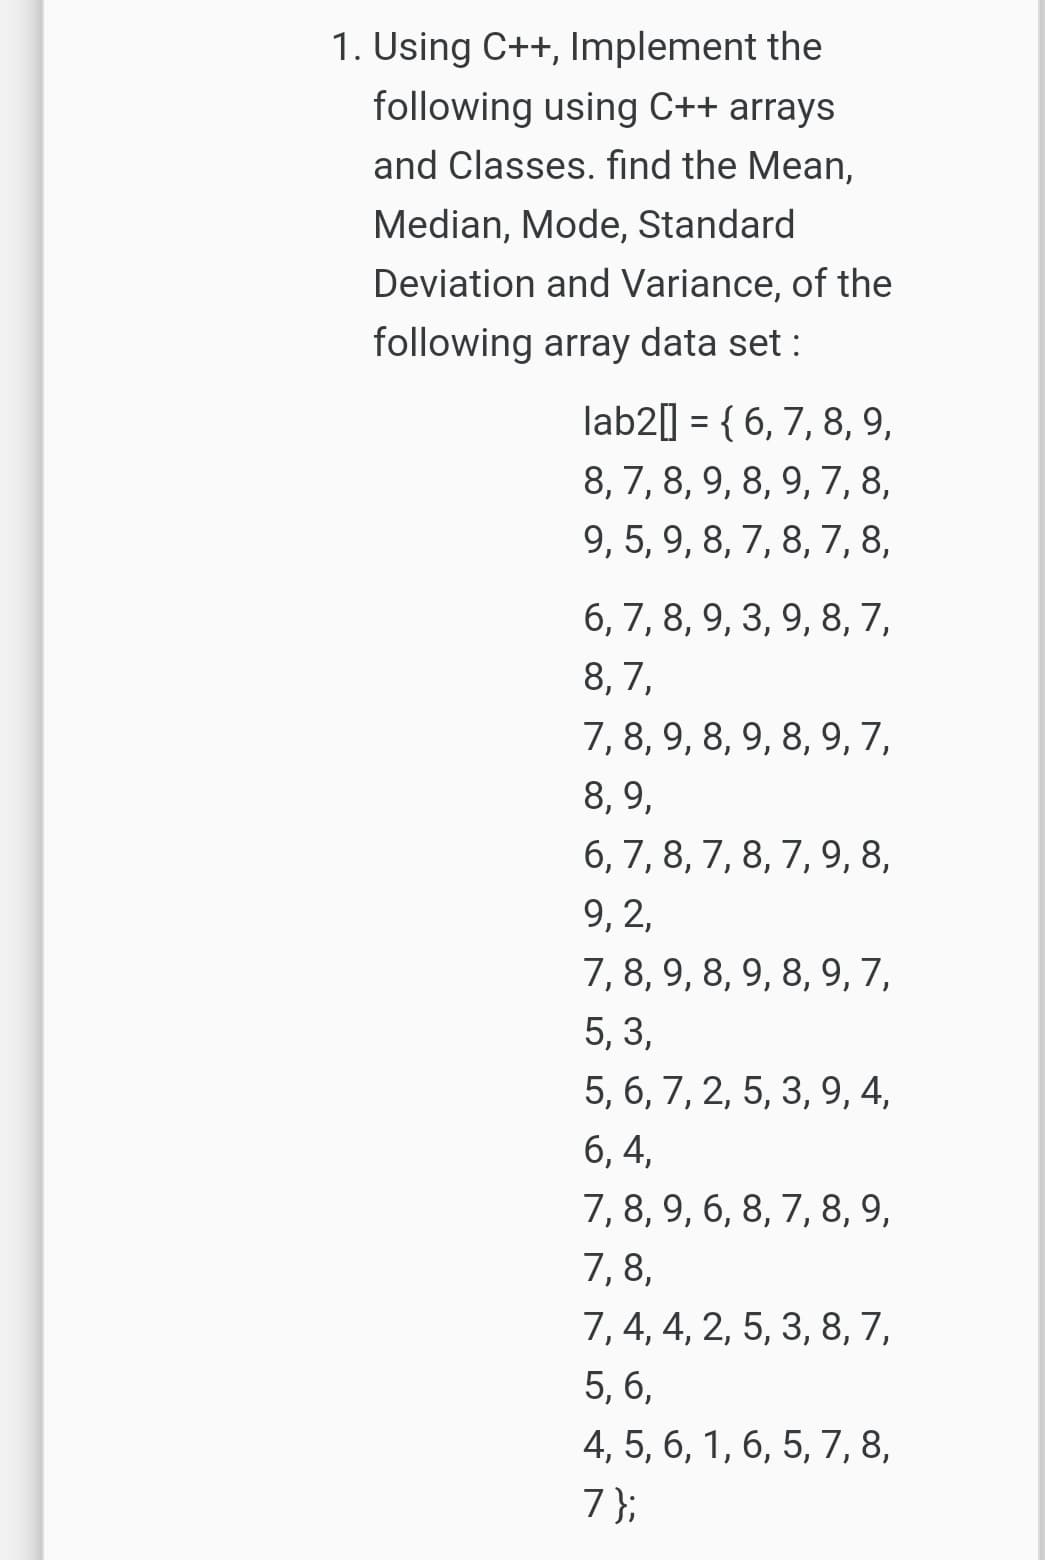 1. Using C++, Implement the
following using C++ arrays
and Classes. find the Mean,
Median, Mode, Standard
Deviation and Variance, of the
following array data set :
lab2] = { 6, 7, 8, 9,
8, 7, 8, 9, 8, 9, 7,8,
9, 5, 9, 8, 7, 8, 7, 8,
6, 7, 8, 9, 3, 9, 8, 7,
8, 7,
7, 8, 9, 8, 9, 8, 9, 7,
8, 9,
6, 7, 8, 7, 8, 7, 9, 8,
9, 2,
7, 8, 9, 8, 9, 8, 9, 7,
5, 3,
5, 6, 7, 2, 5, 3, 9, 4,
6, 4,
7, 8, 9, 6, 8, 7, 8, 9,
7,8,
7, 4, 4, 2, 5, 3, 8, 7,
5, 6,
4, 5, 6, 1, 6, 5, 7, 8,
7};
